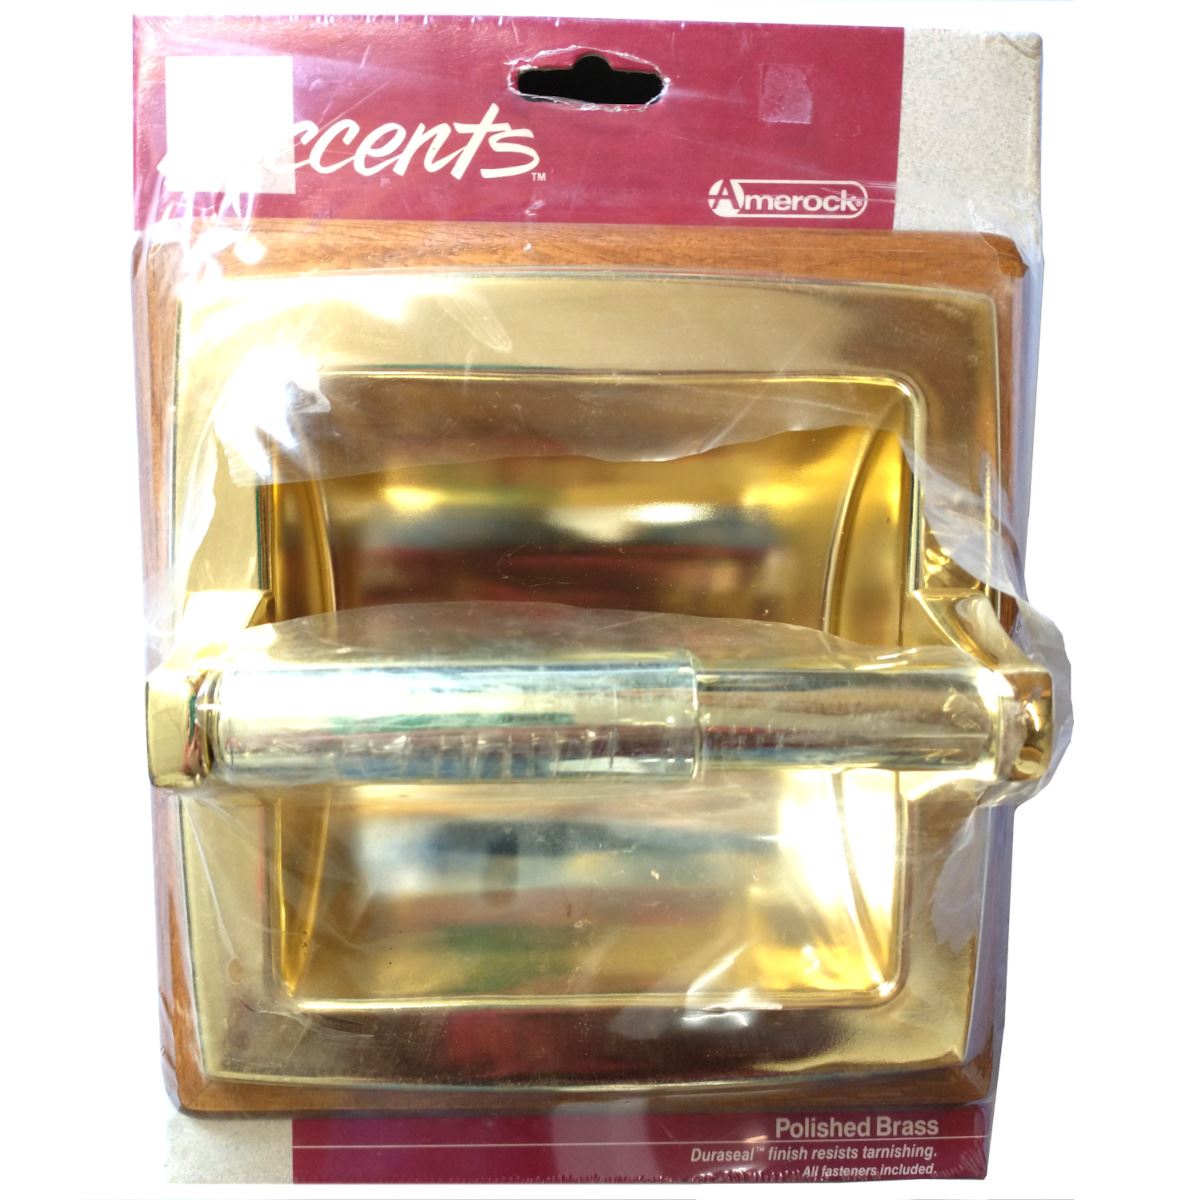 Amerock Accents Polished Brass and Oak Toliet Tissue Paper Holder Recessed 52232